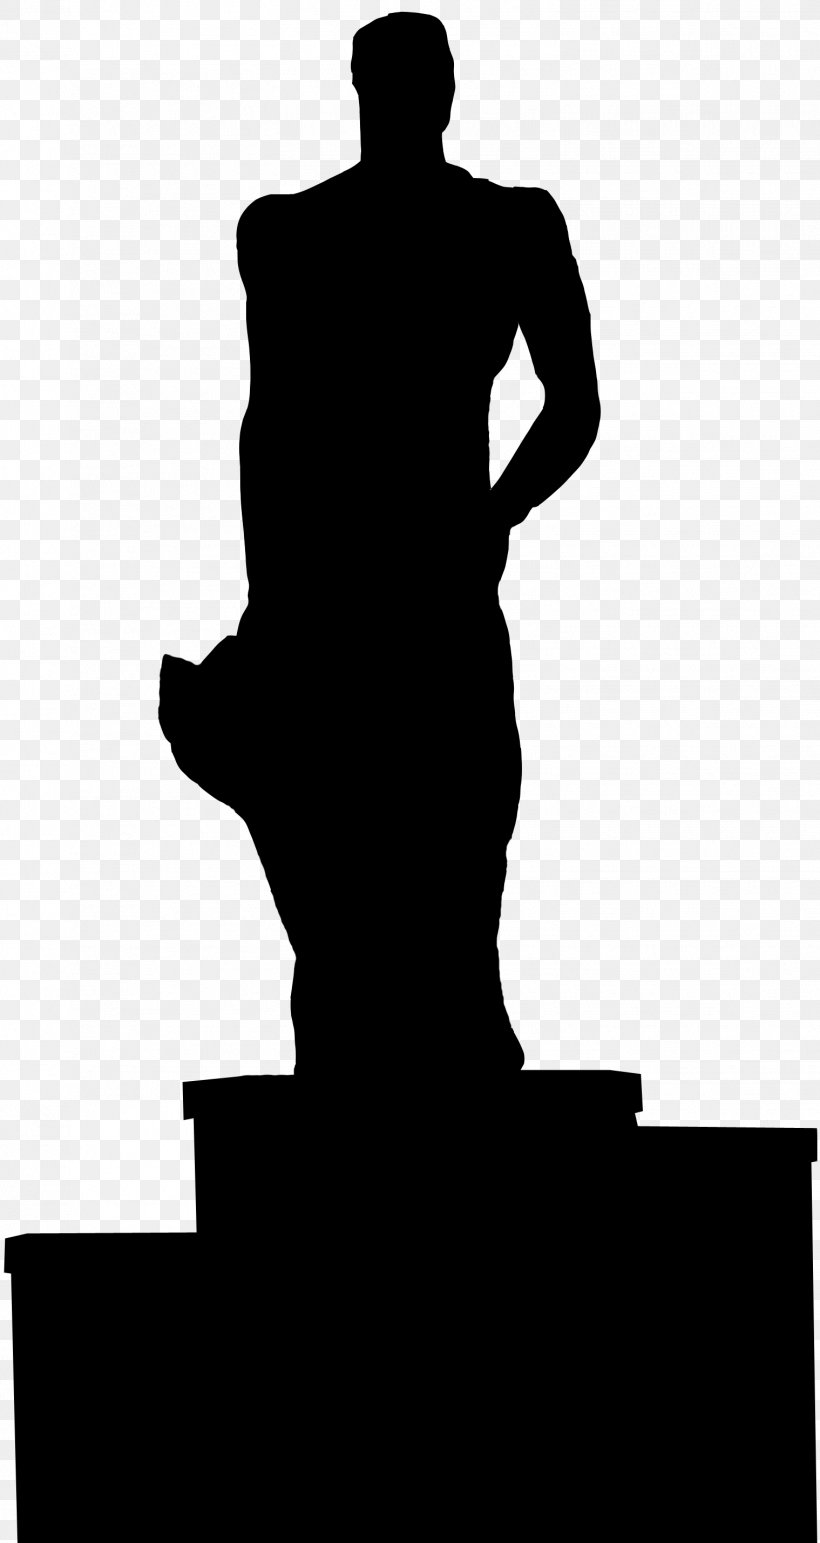 Silhouette Standing Statue Black-and-white, PNG, 1519x2859px, Silhouette, Blackandwhite, Standing, Statue Download Free